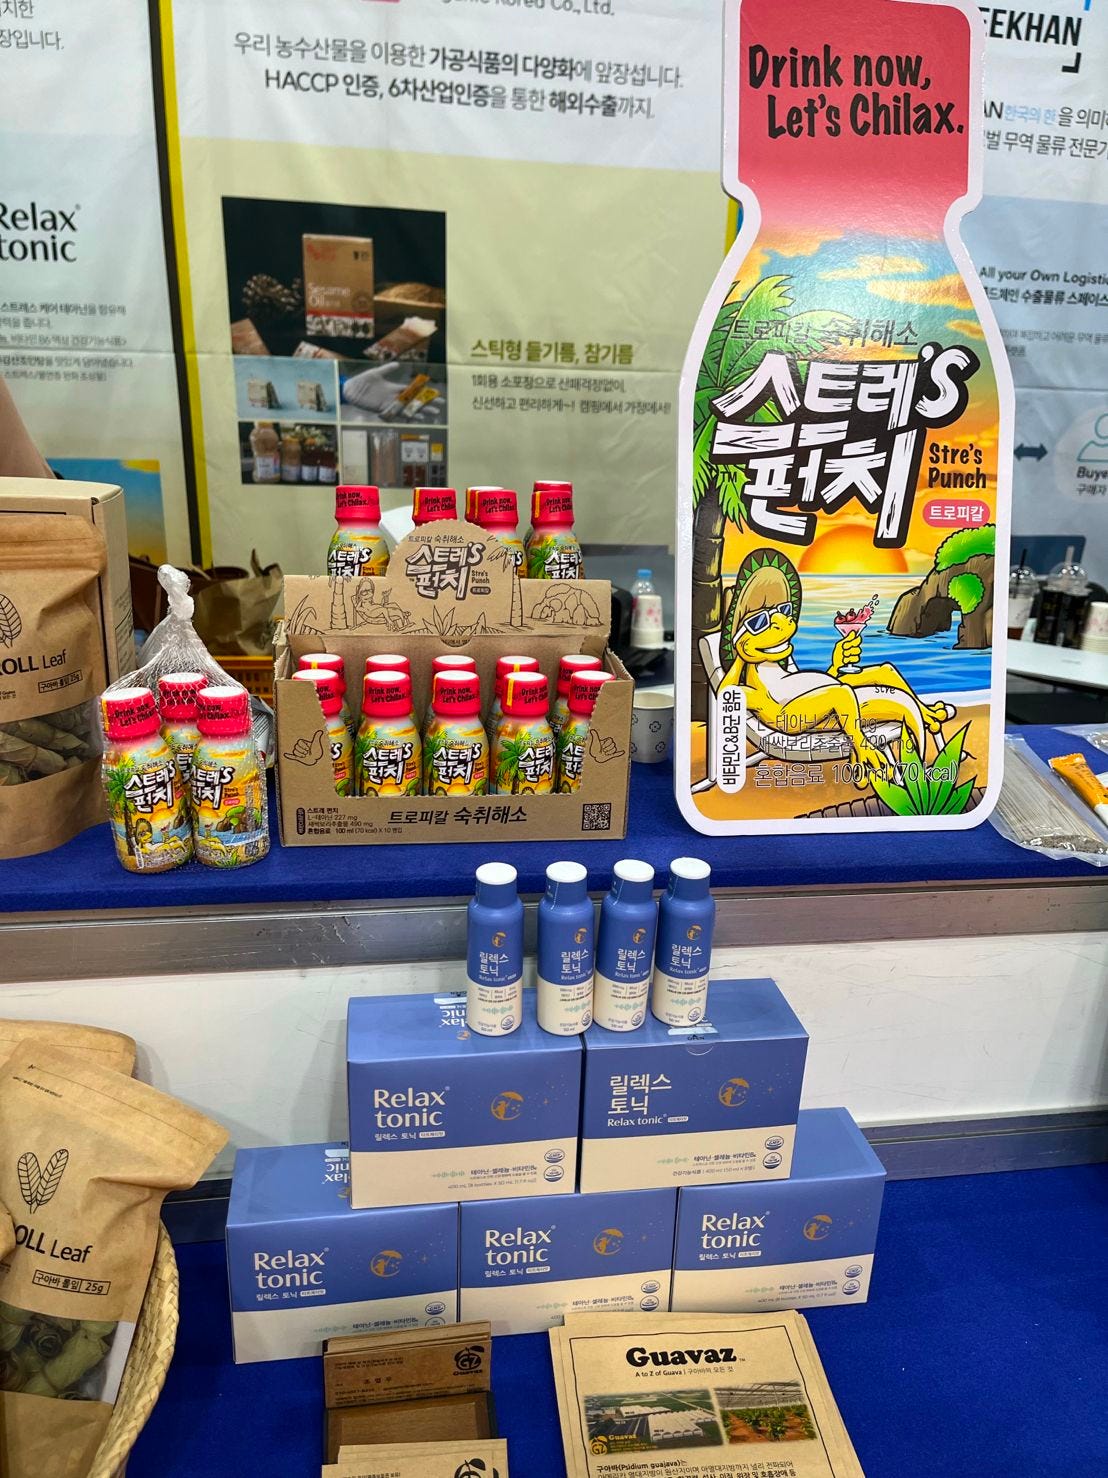 photo of relaxation drink which is a big south korea beverage trend